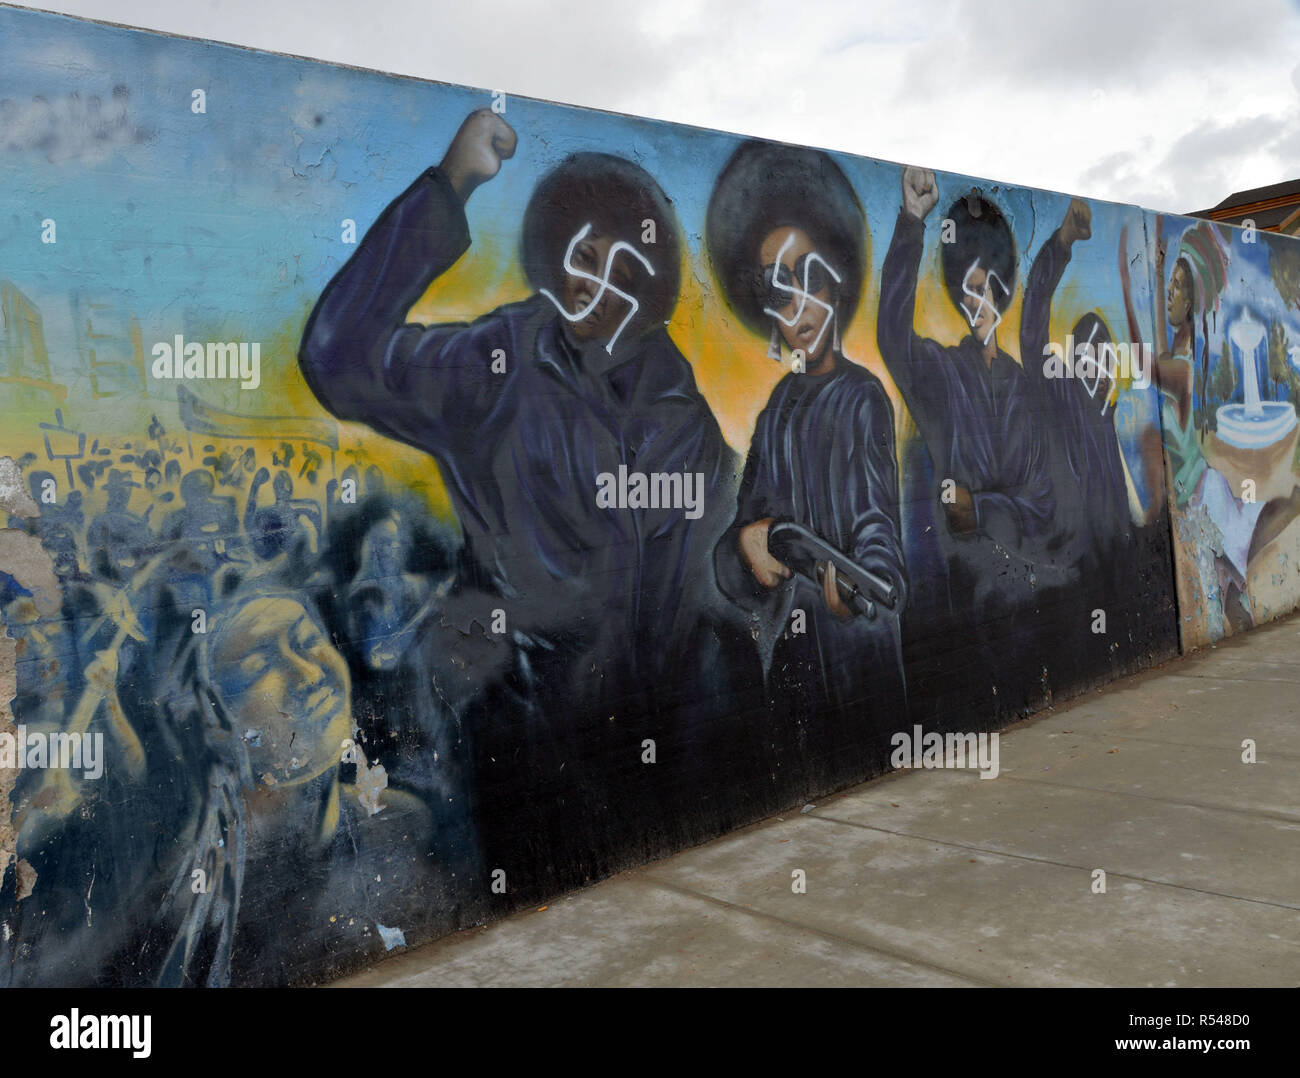 Los Angeles, Ca, USA. 29th Nov, 2018. The Crenshaw Wall Defaced with Swastika in Los Angeles, California on November 29, 2018. Credit: Koi Sojer/Snap'n U Photos/Media Punch/Alamy Live News Stock Photo